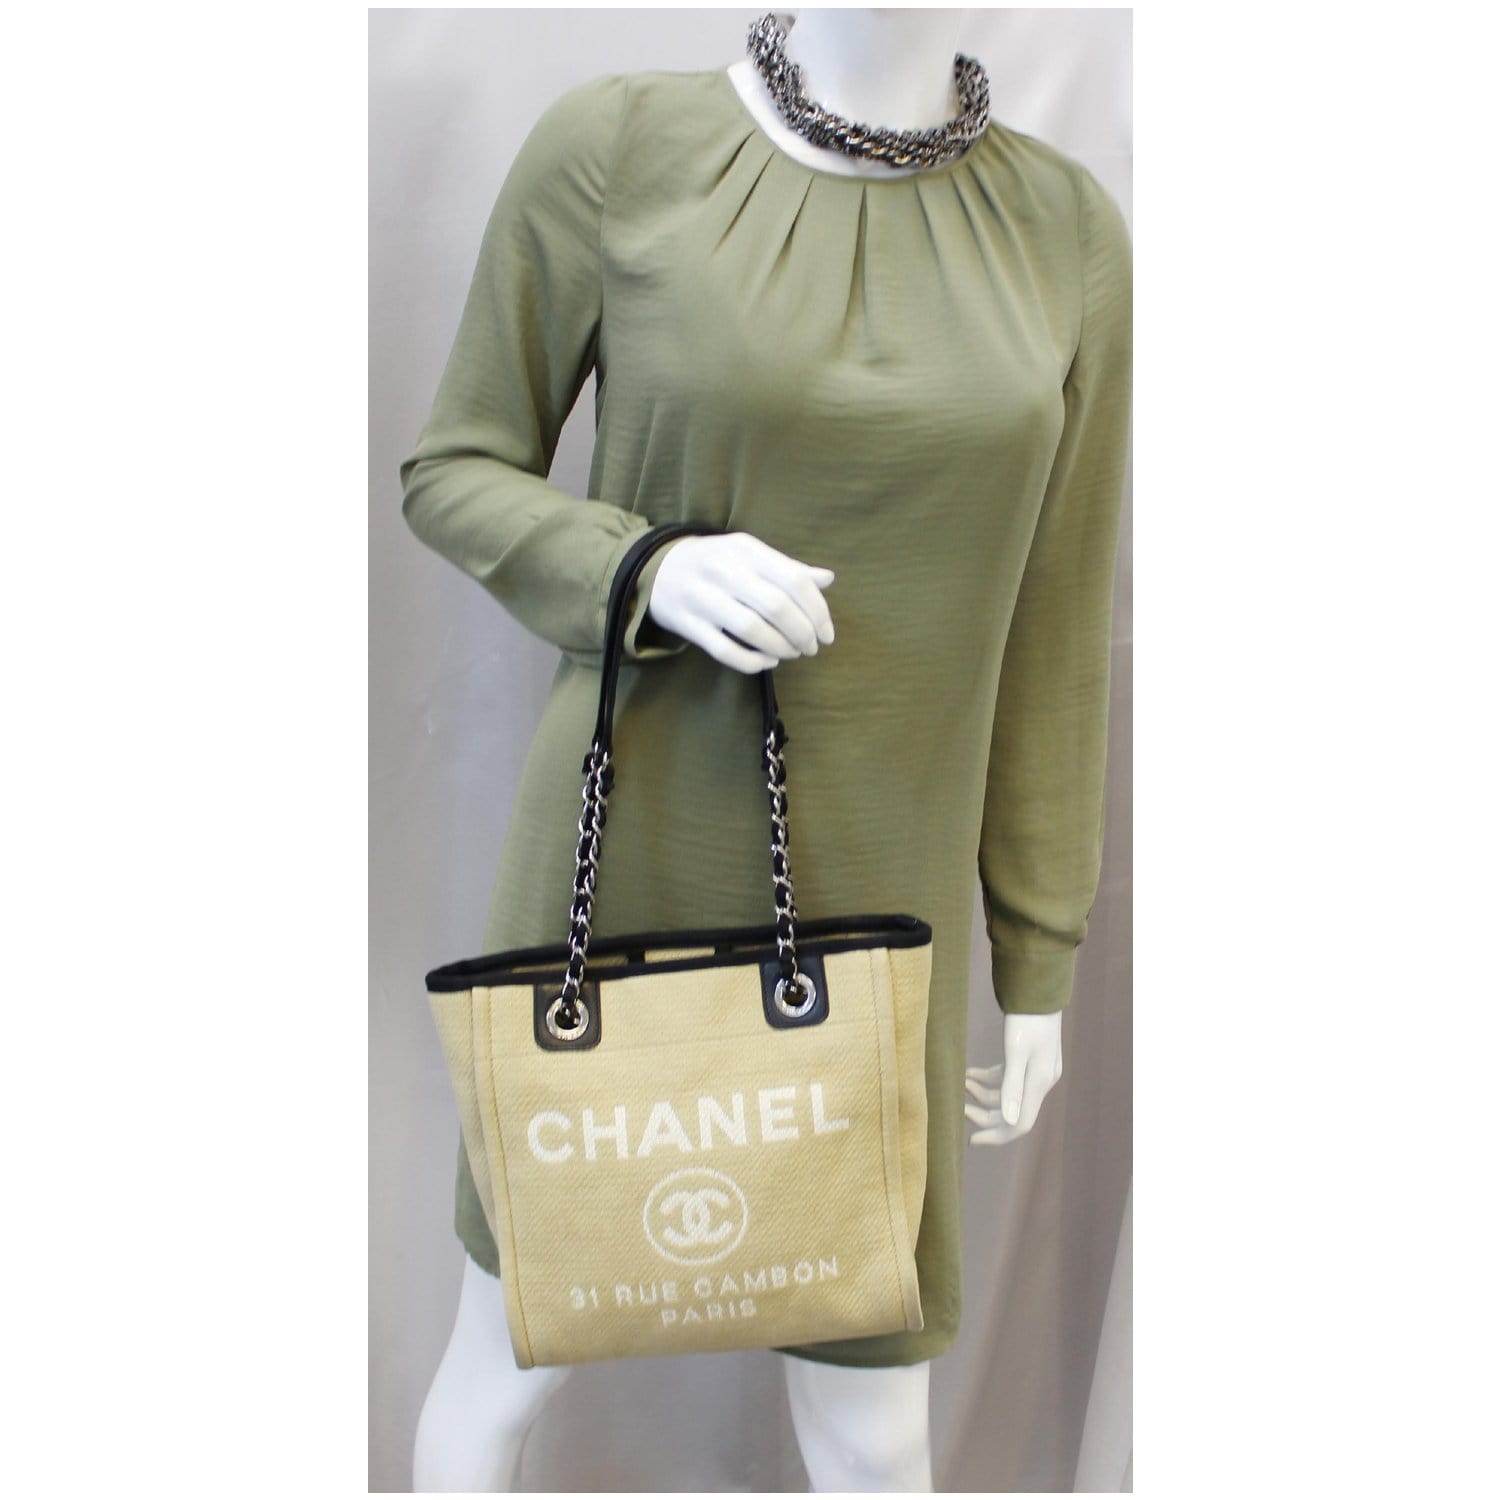 Chanel Small Deauville Shopping Tote in Dark Blue Denim Fabric and LGHW